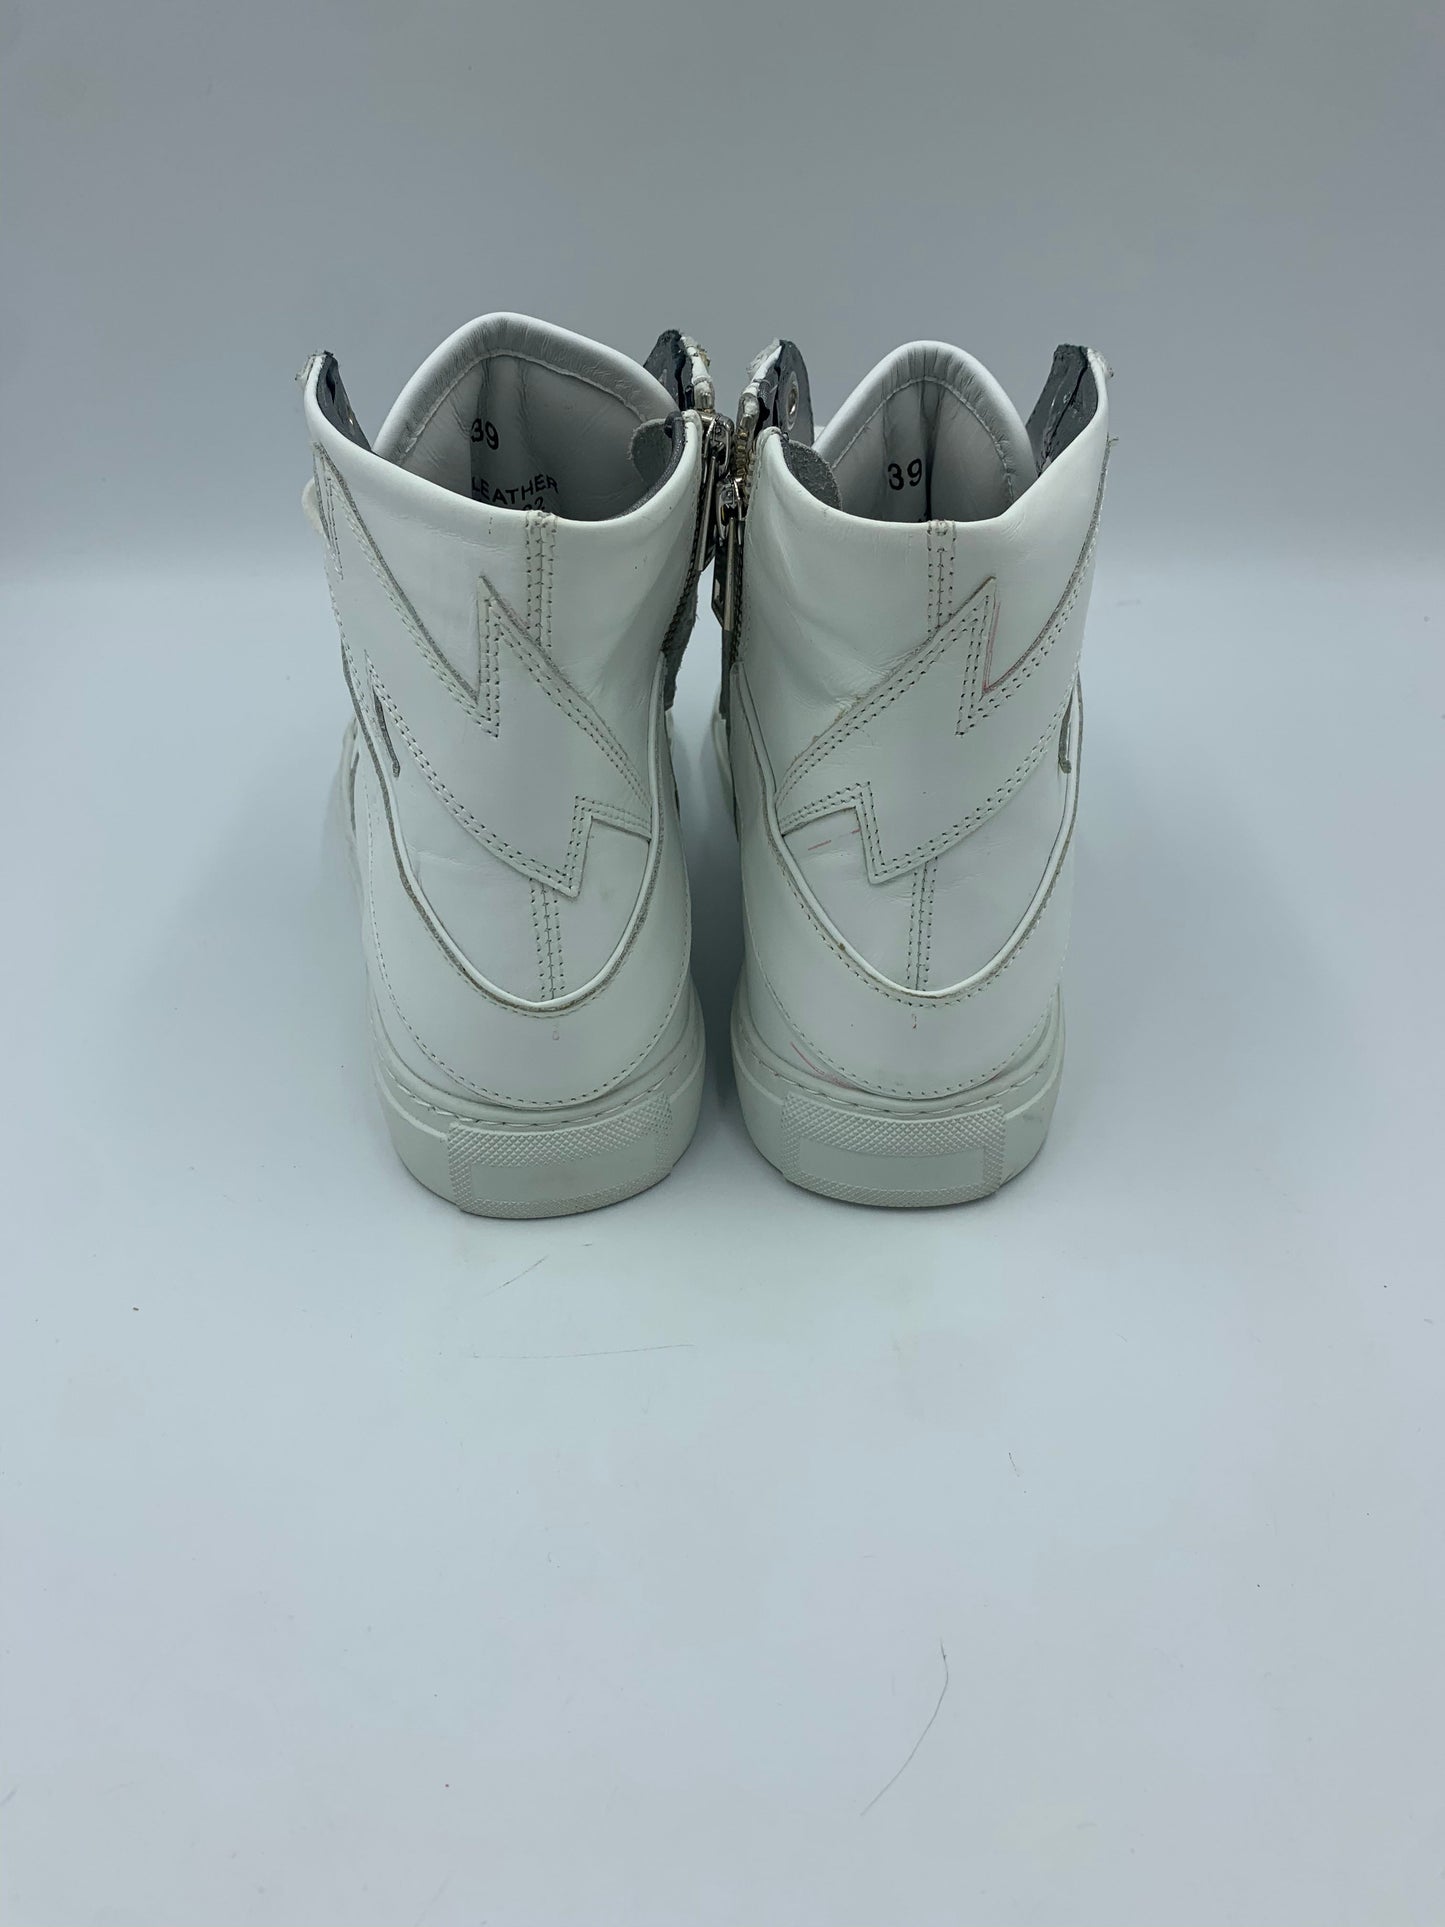 White Shoes Designer Zadig And Voltaire, Size 8.5